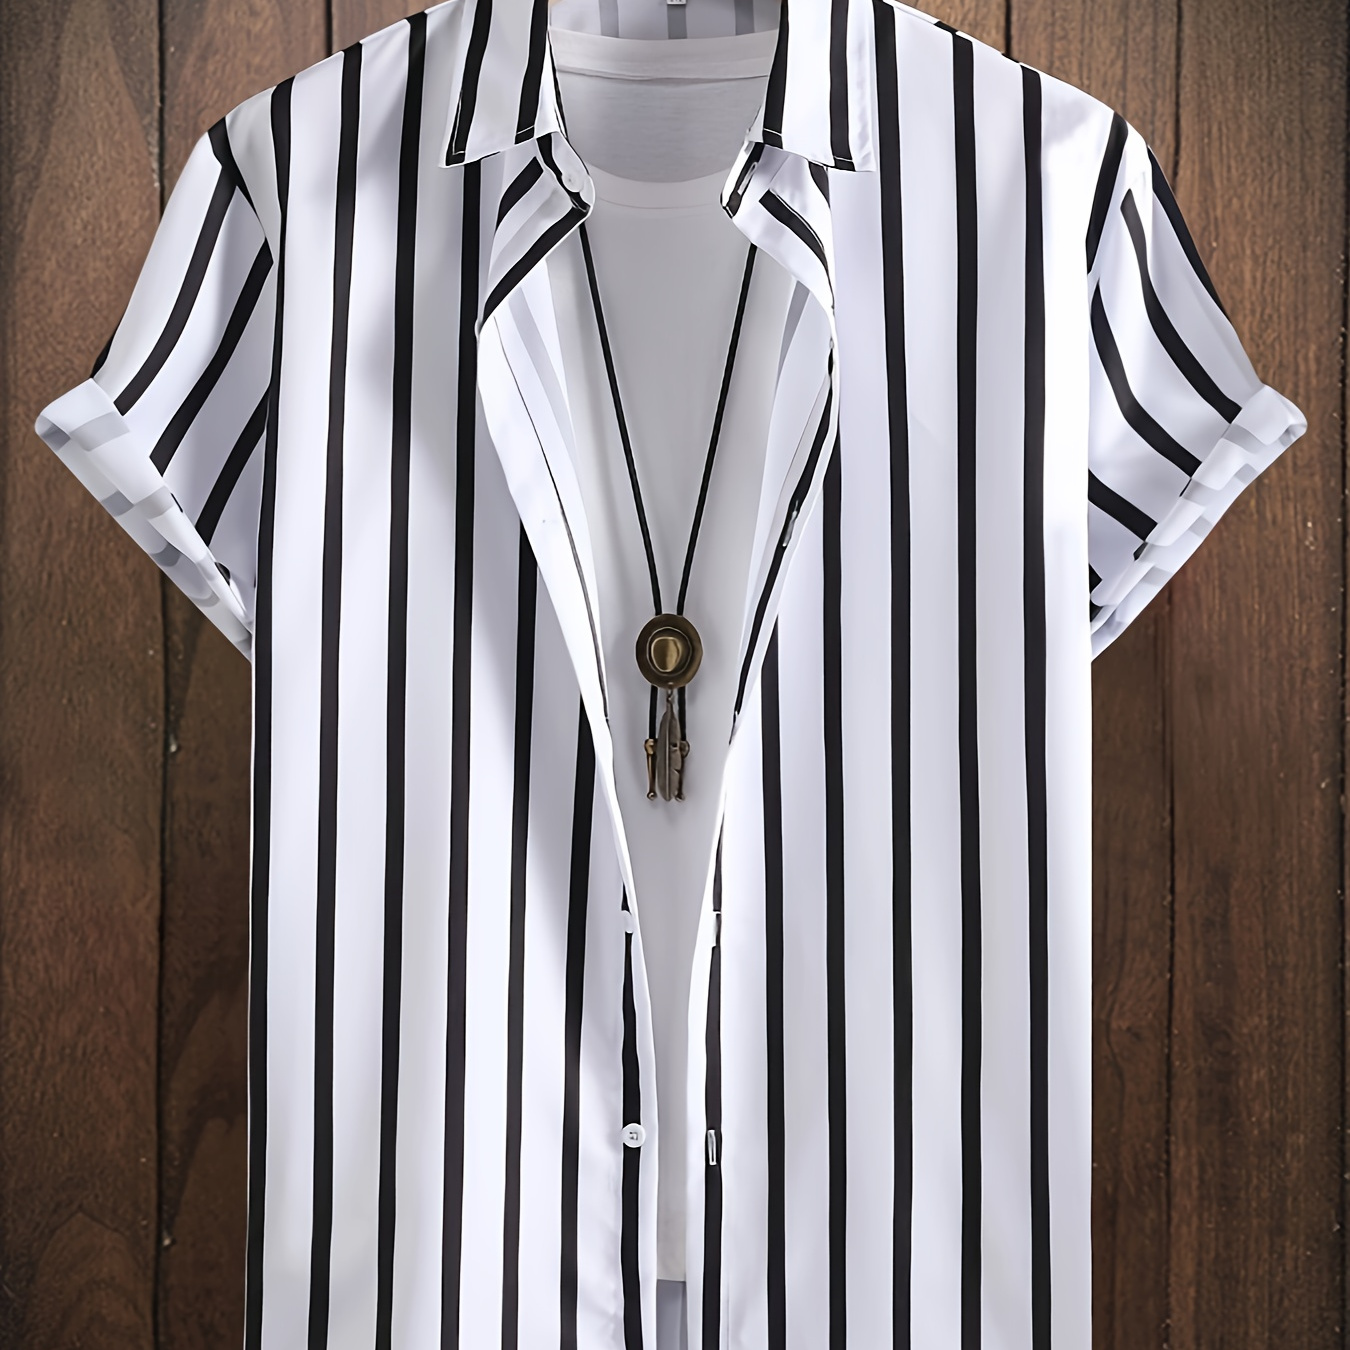 

Men's Elegant Short-sleeve Button-up Shirt, Classic Black And White Striped Print, Casual Dress Shirt With Collar